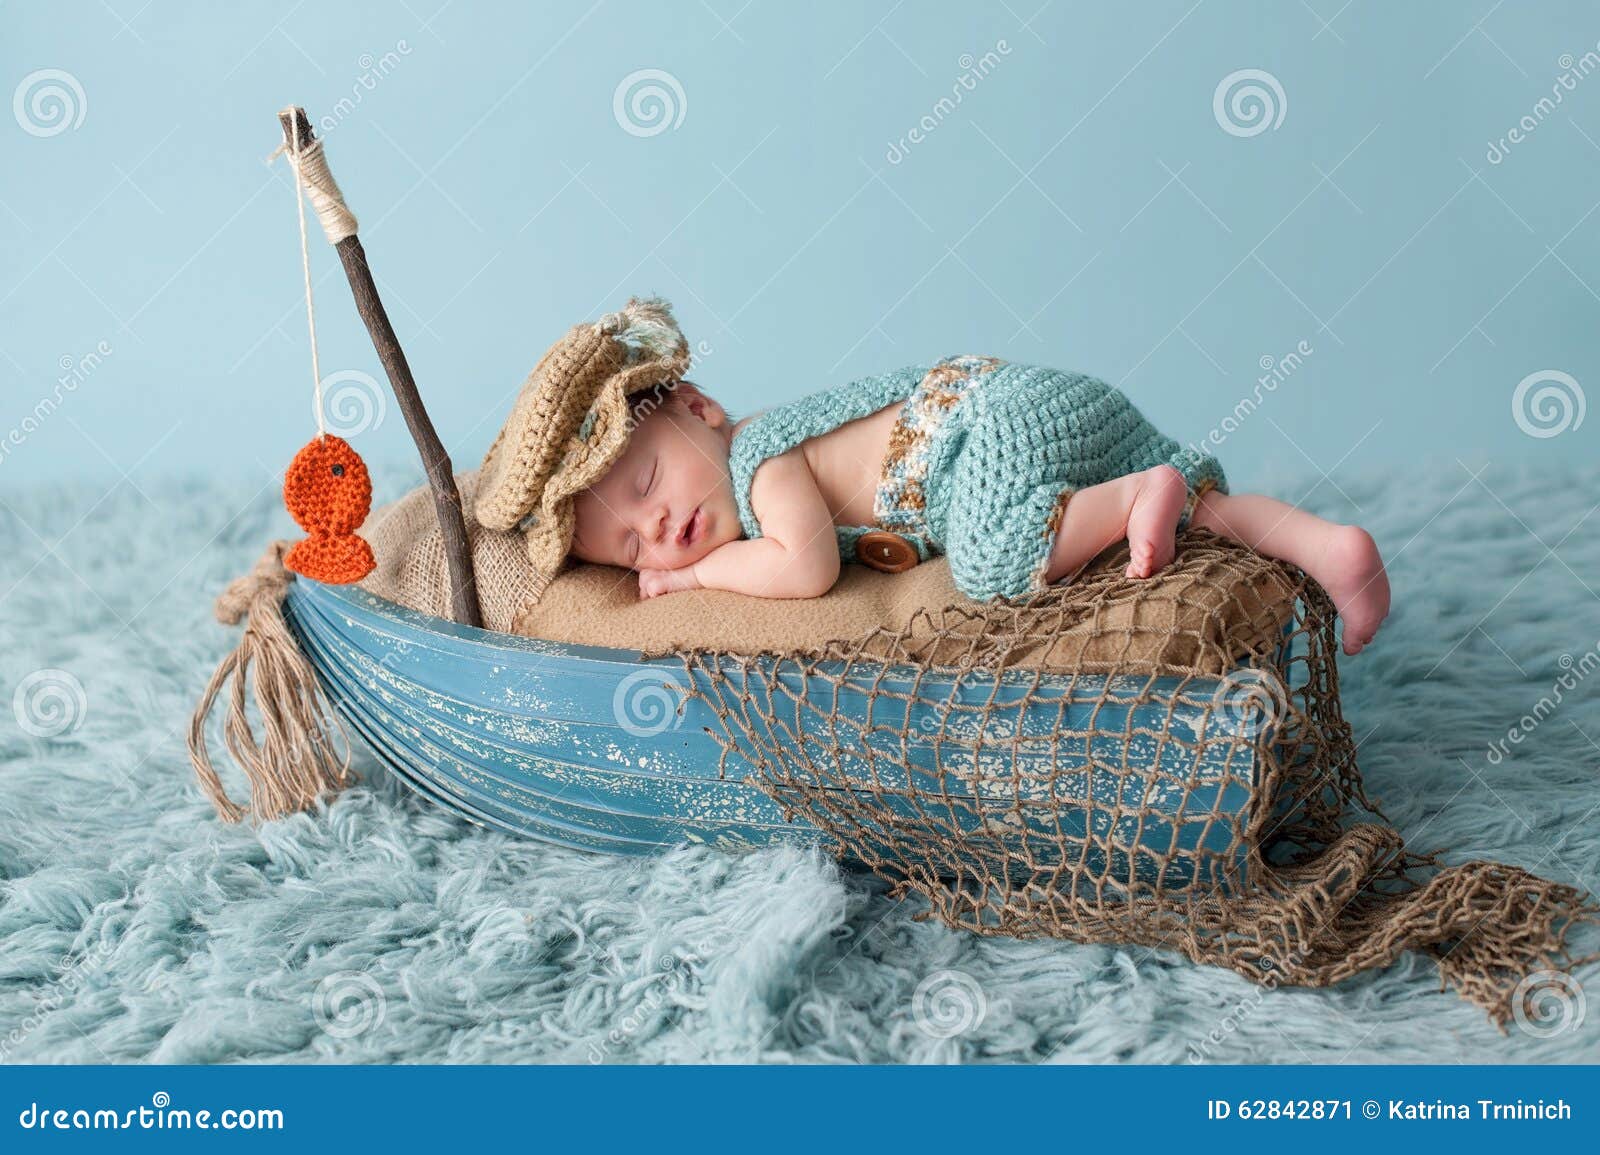 Newborn Baby Boy in Fisherman Outfit Stock Image - Image of male, baby:  62842871